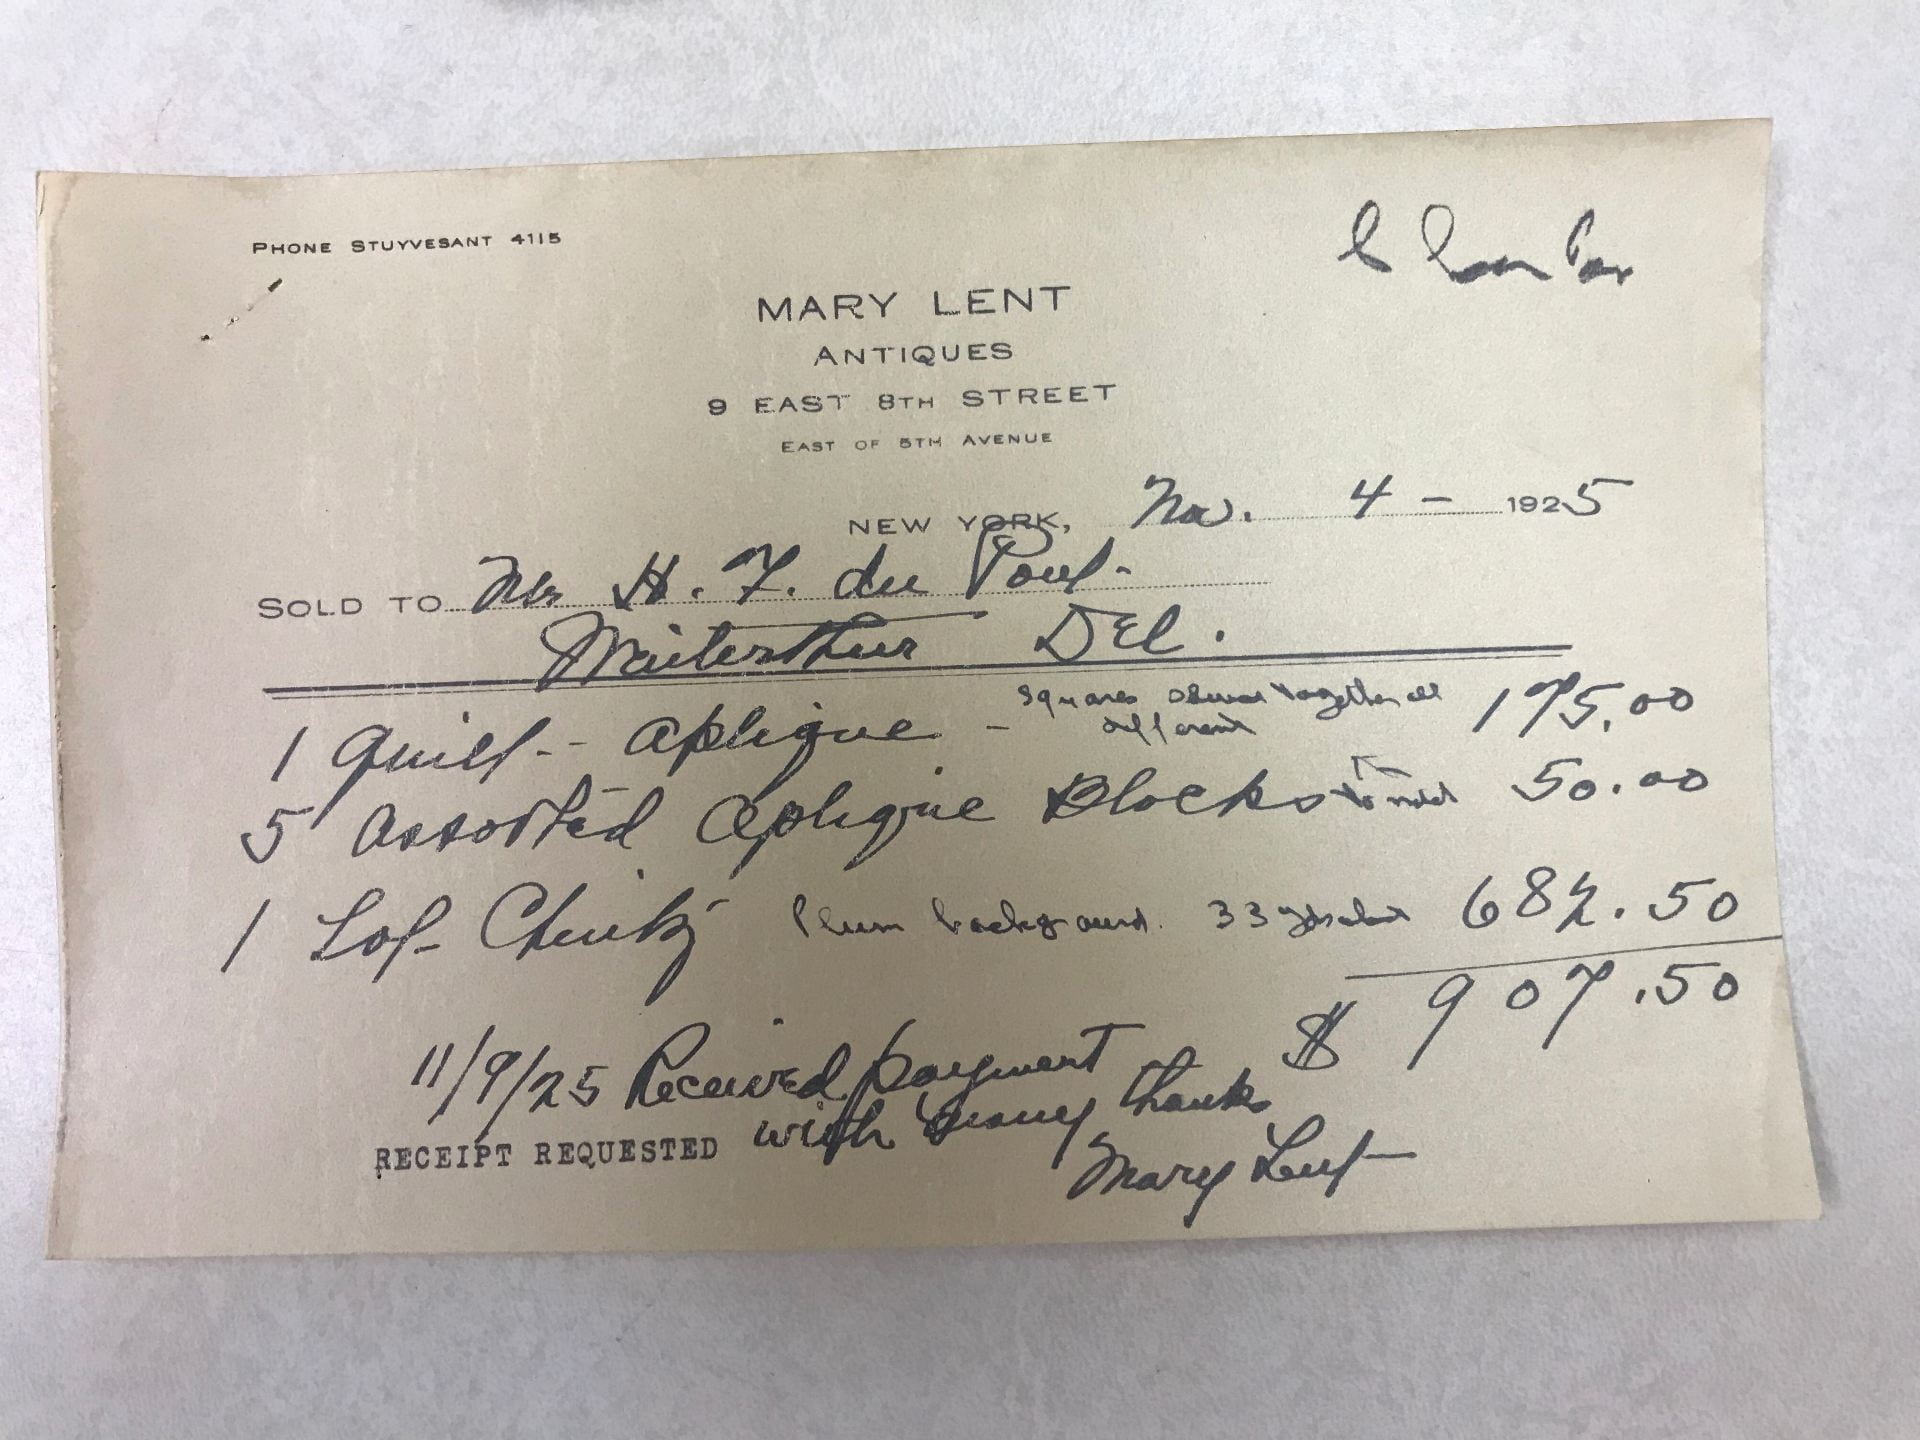 A piece of paper with handwriting for a bill of sale from Mary Lent to H.F. du Pont that reads “1 quilt – aplique, all squares sewn together all different” and “5 assorted aplique blocks to match” for $225.00.